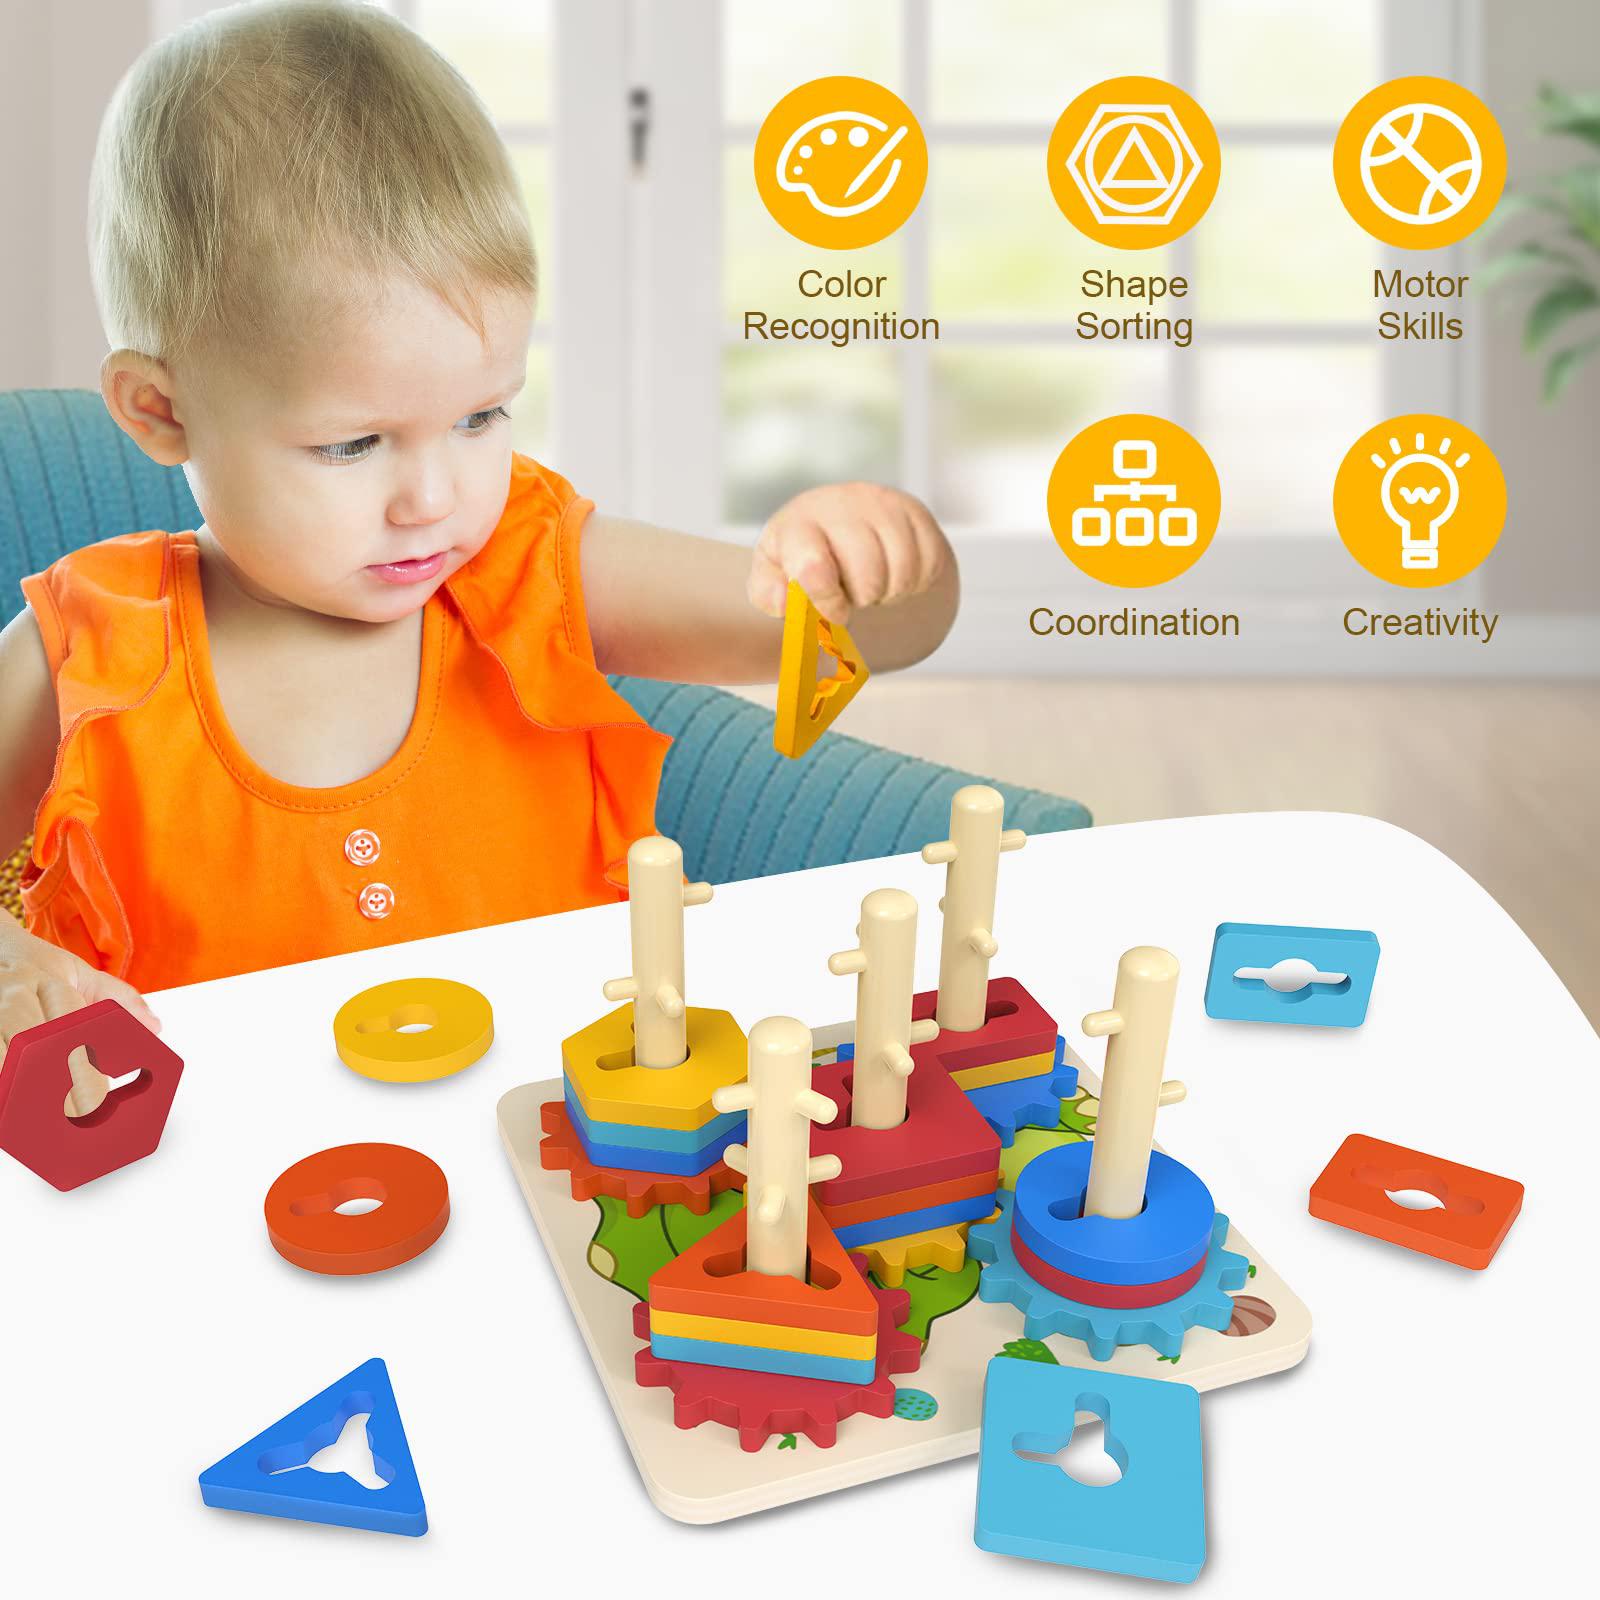 achiyway montessori toys for 1 2 3 year old toddlers,wooden sorting & stacking toys for boys girls,toddler boy & girl toys ag